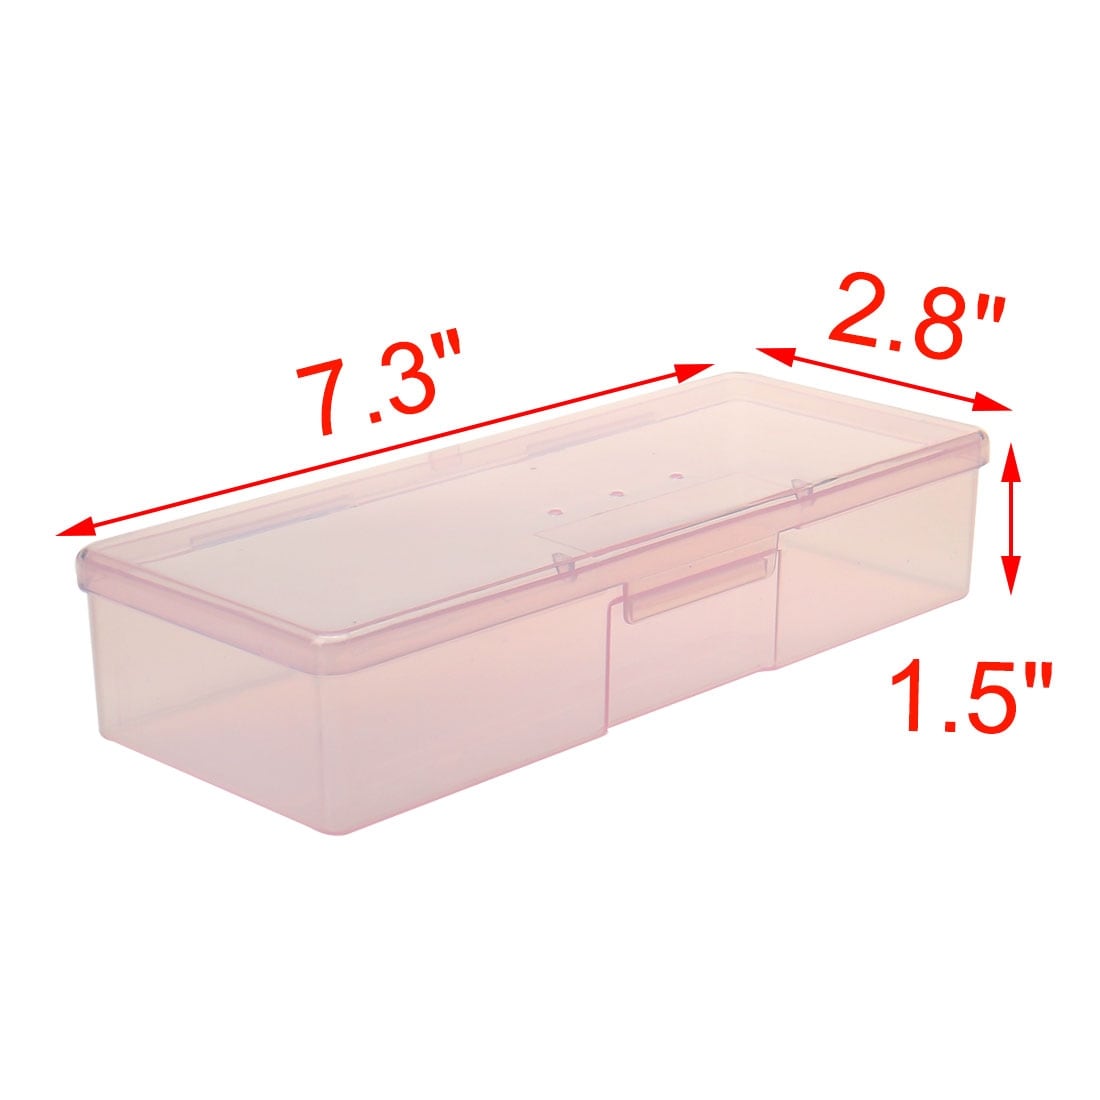 4pcs Plastic Pencil Case Plastic Stationery Box With Hinged Lid And Snap  (clear) (3-h)